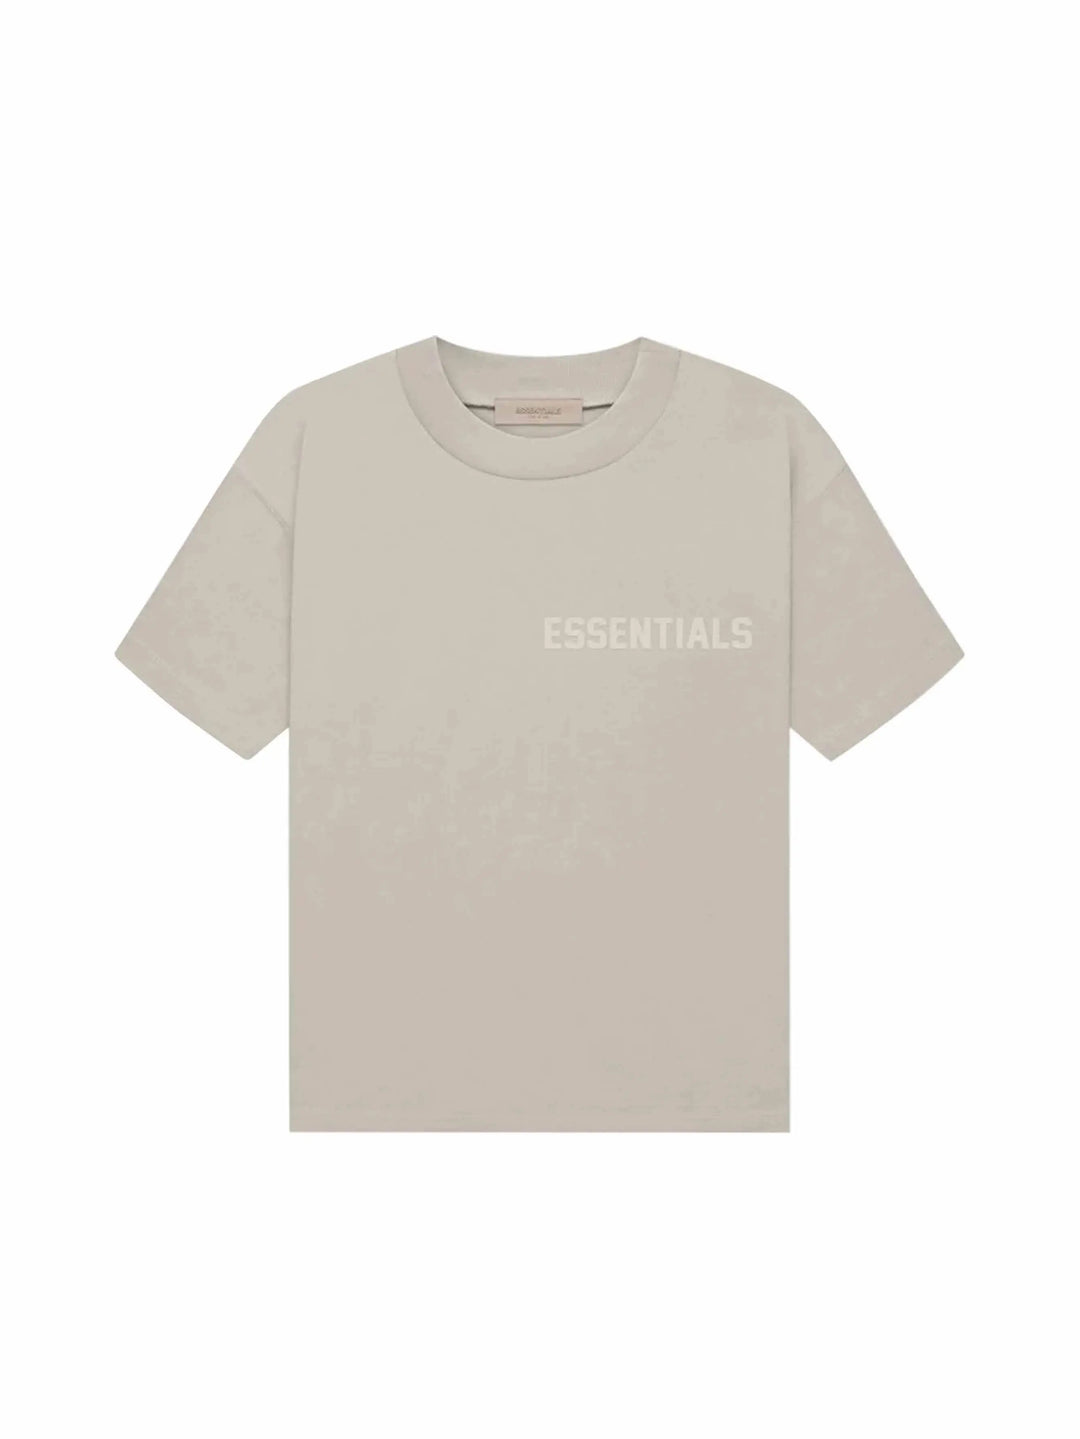 Fear of God Essentials Tee Smoke in Auckland, New Zealand - Shop name